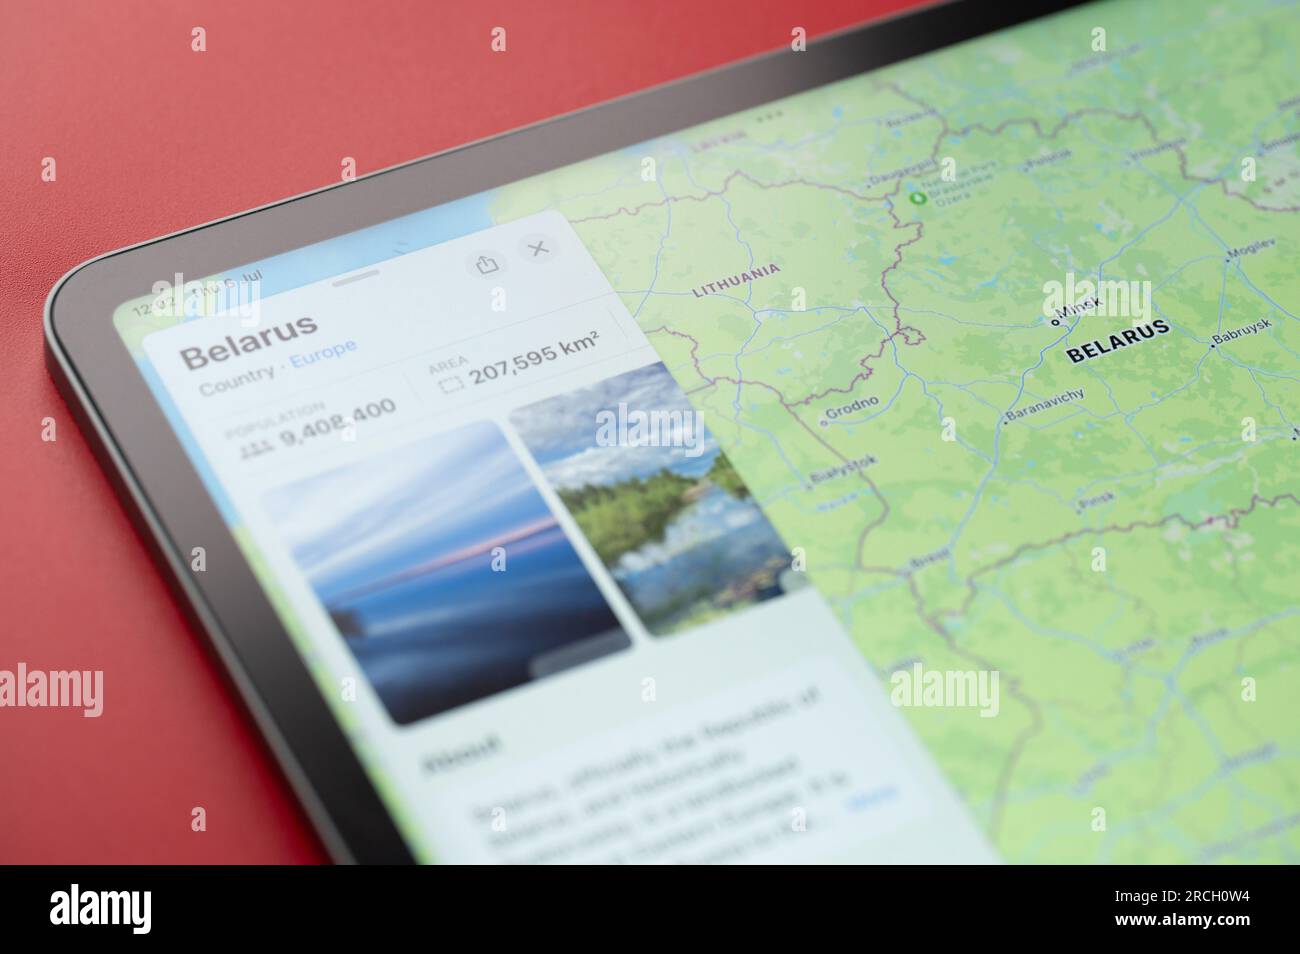 New York, USA - July 6, 2023: Belarus country on world map in screen of ipad tablet close up view Stock Photo